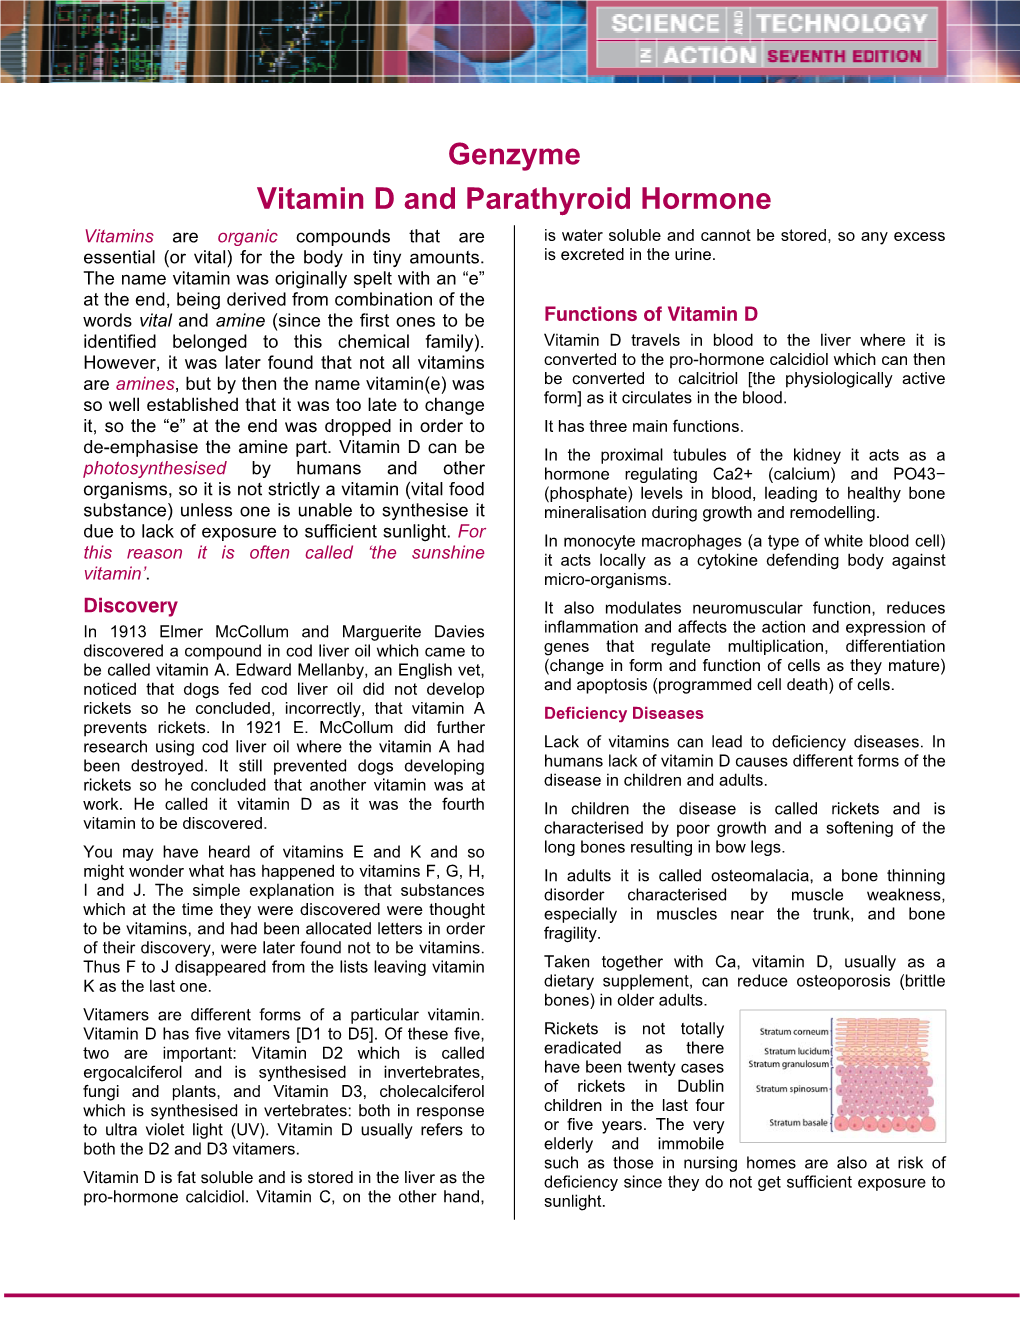 Genzyme Vitamin D and Parathyroid Hormone